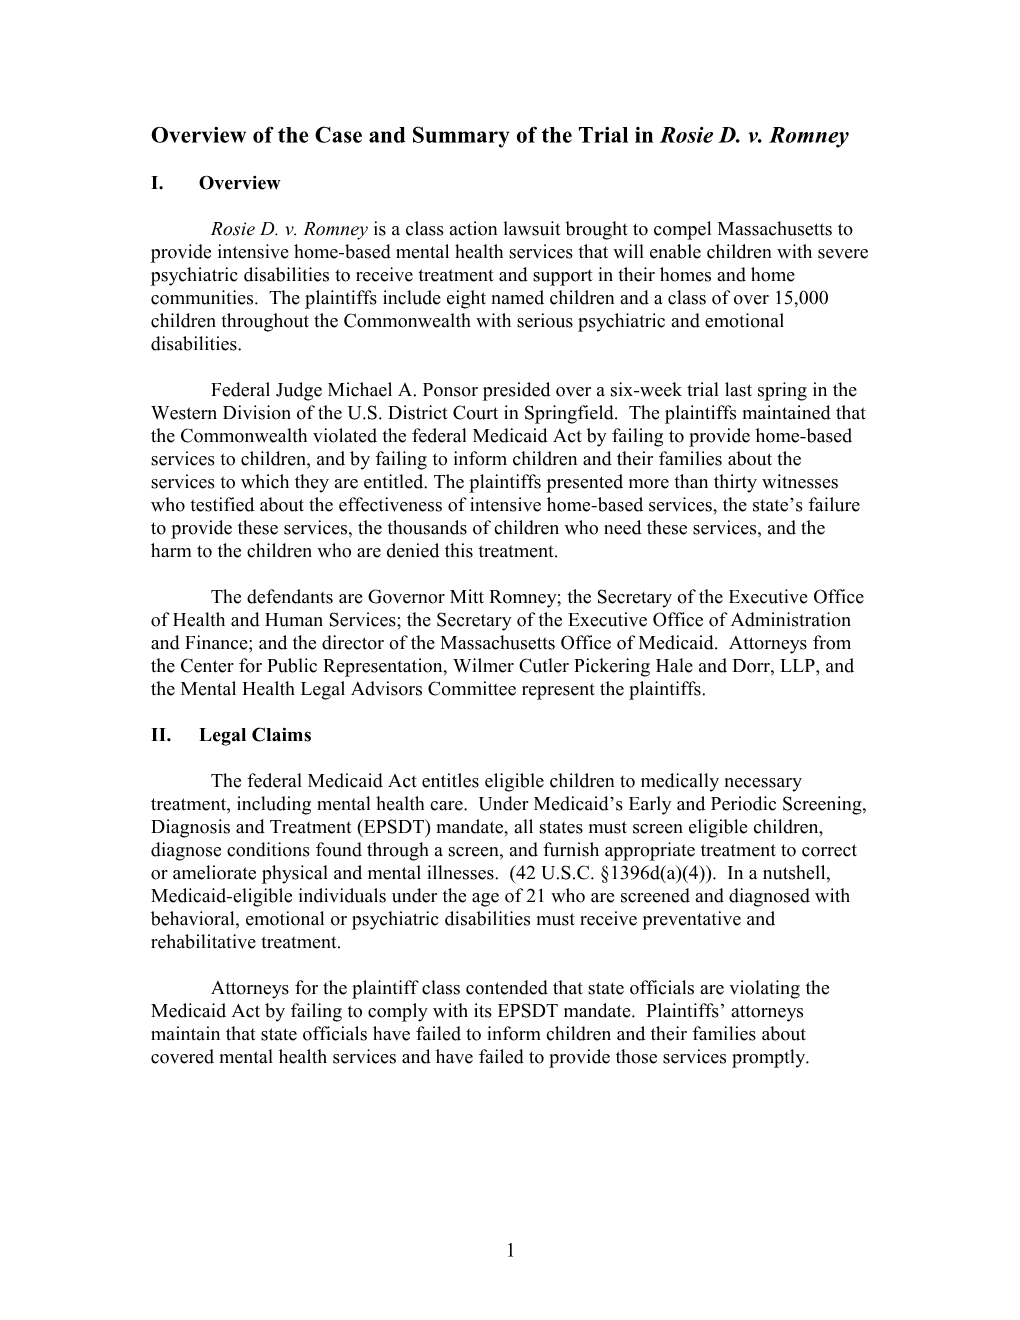 Overview of the Case and Summary of the Trial in Rosie D. V. Romney